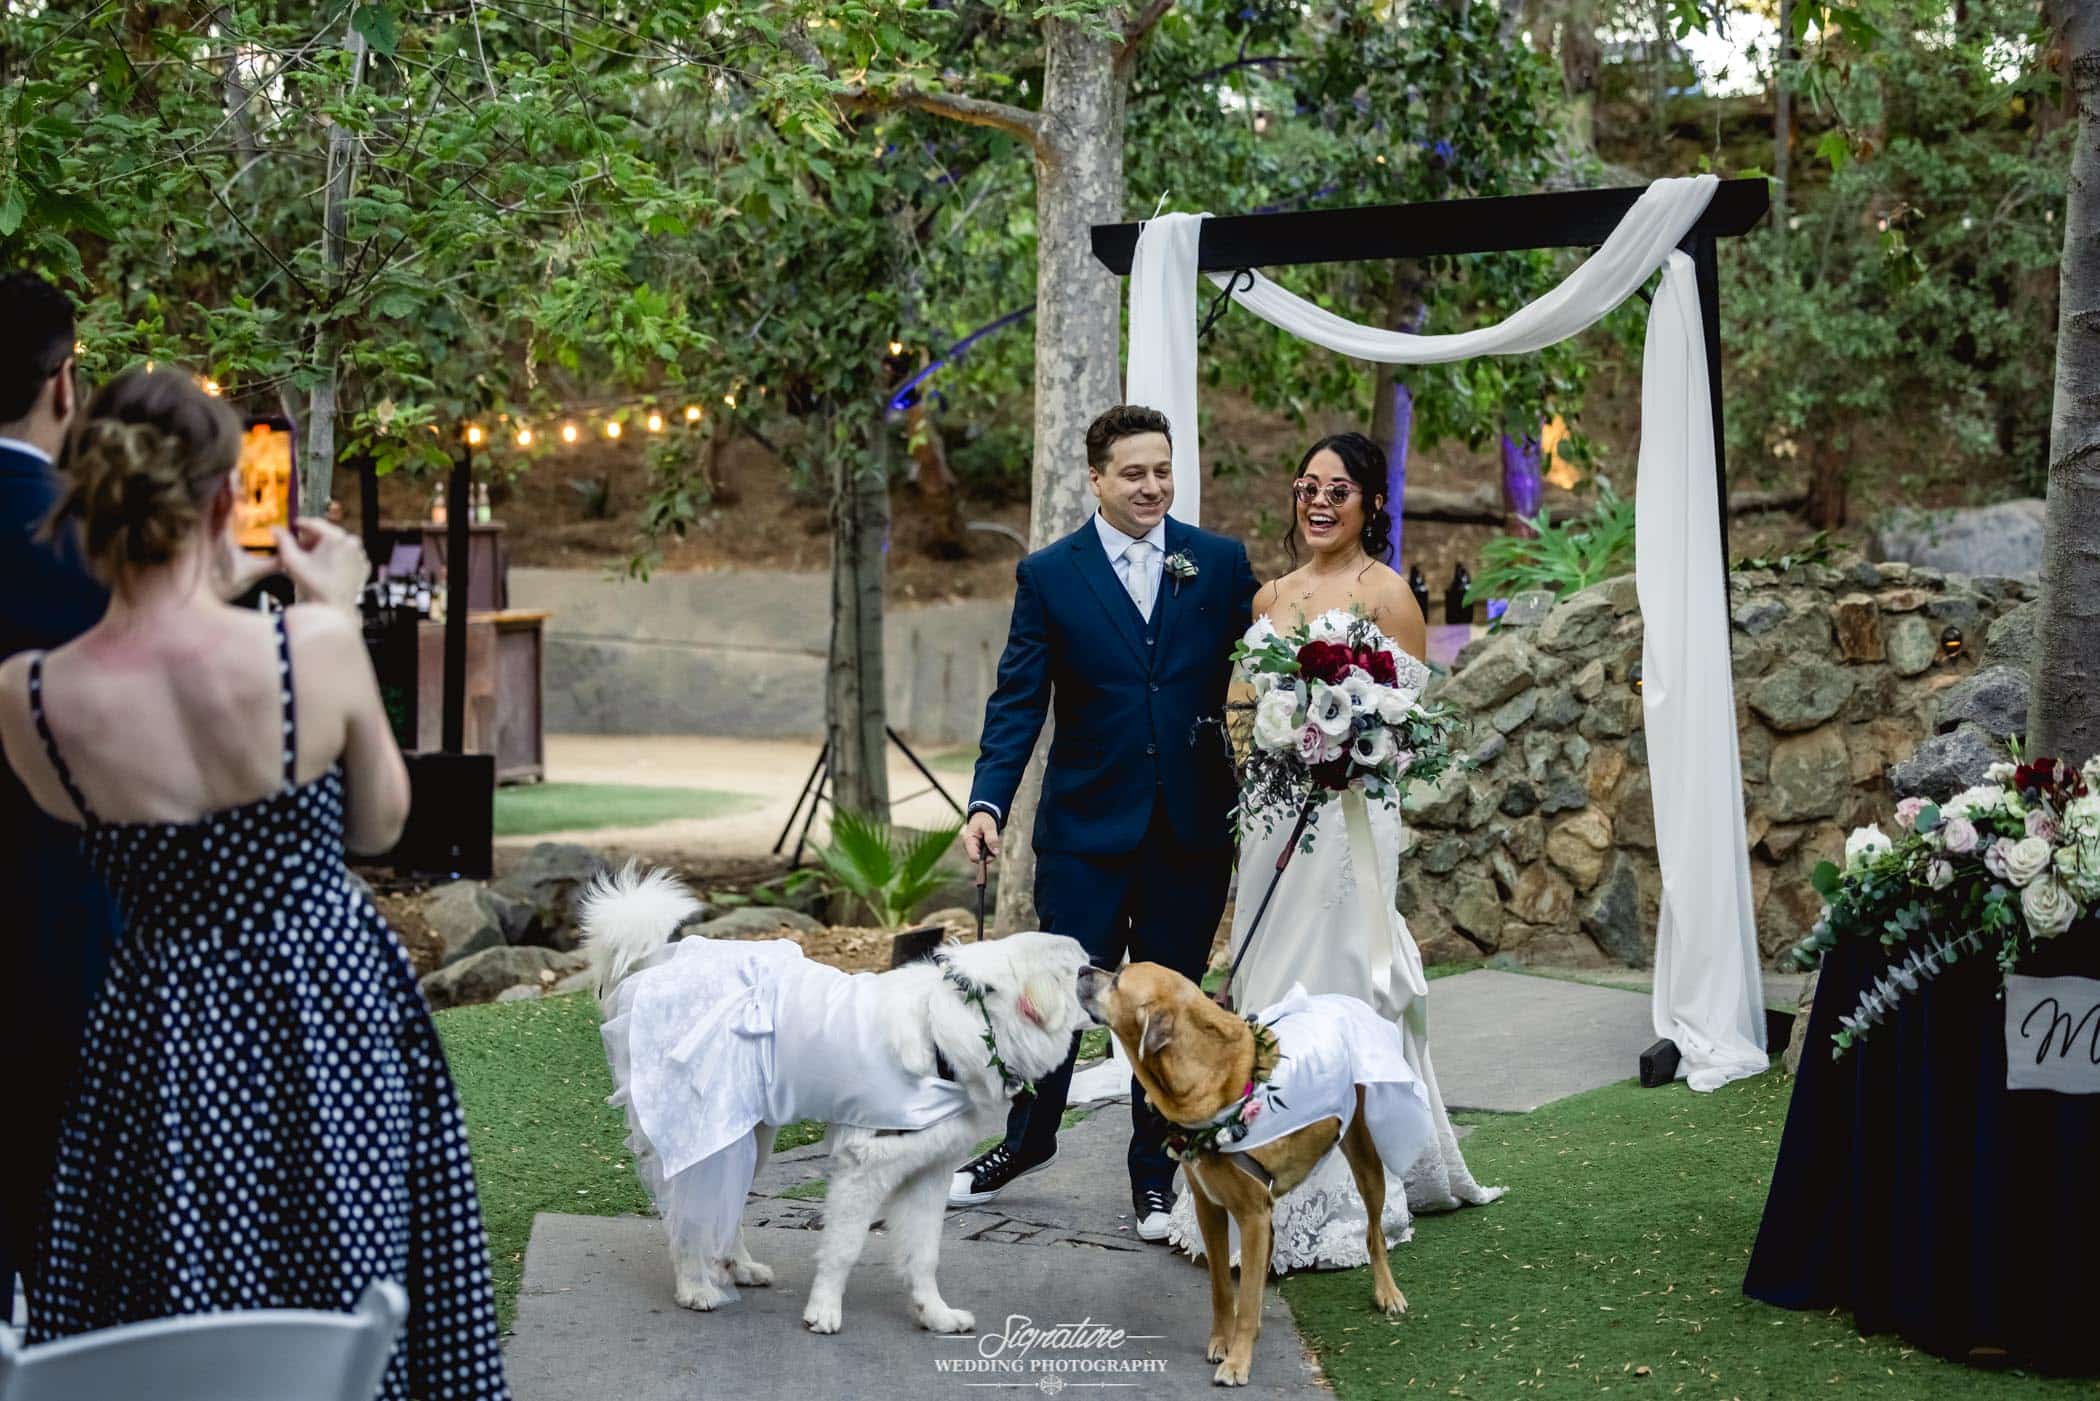 Bride and groom with dogs in dresses